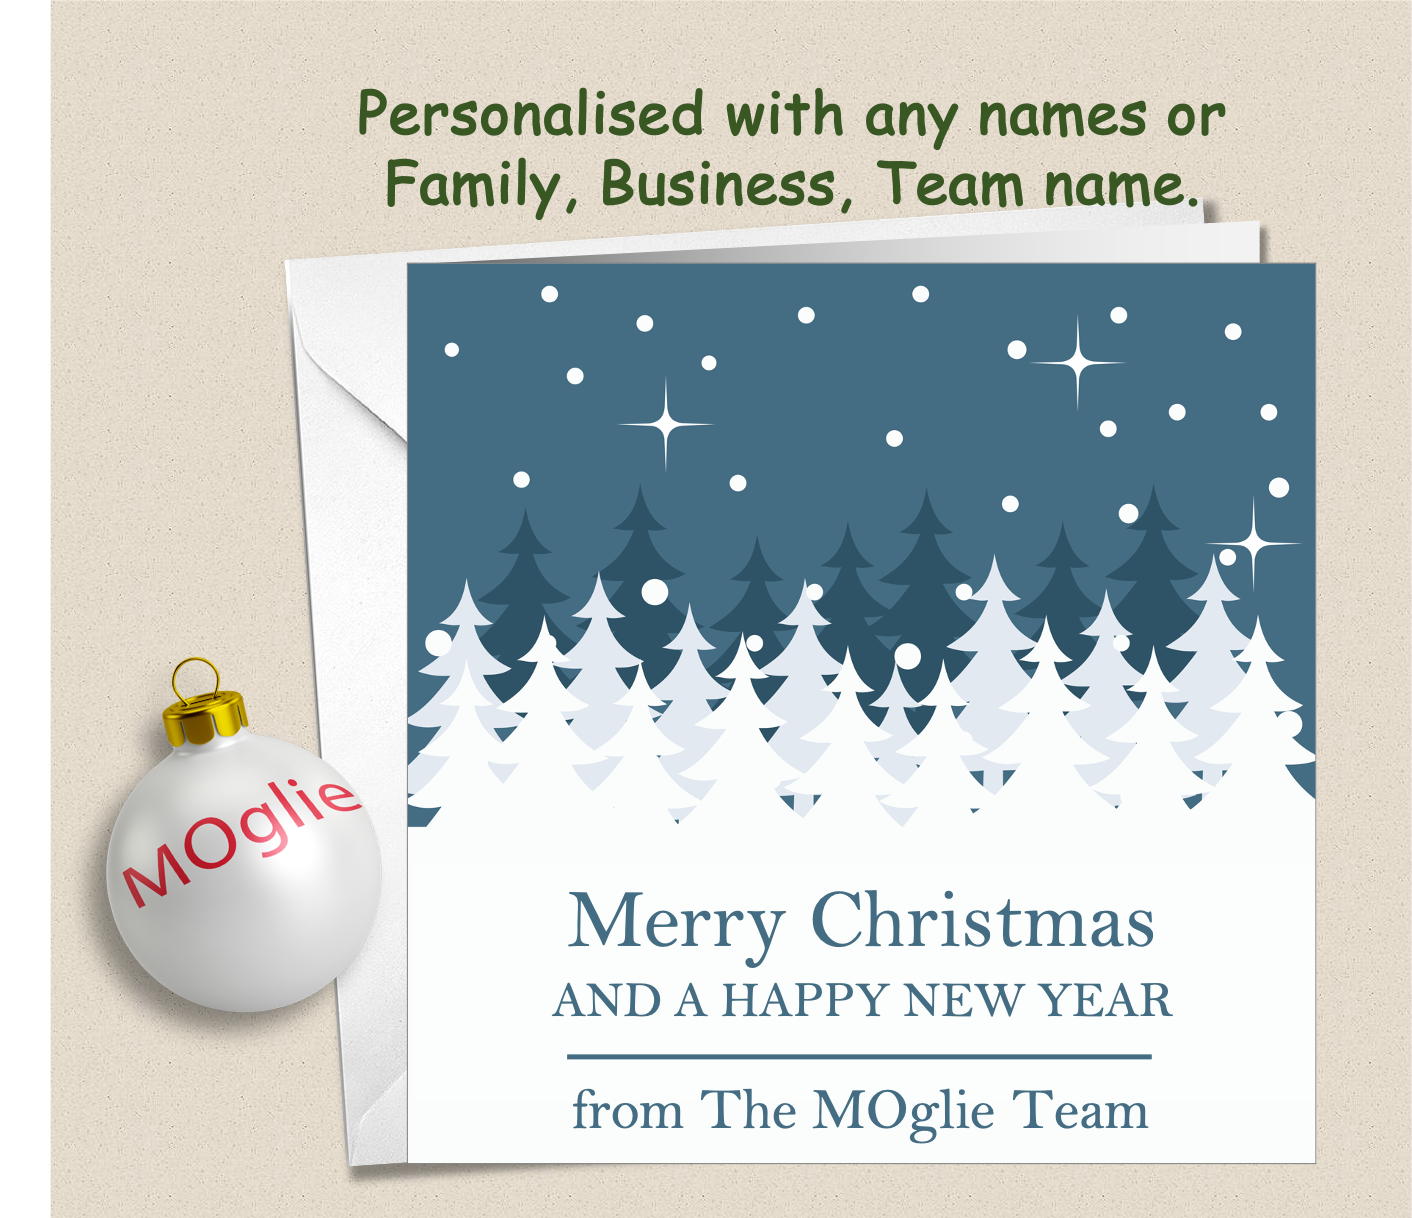 Personalised Christmas Xmas card with any family name, club, work or business - GEN8